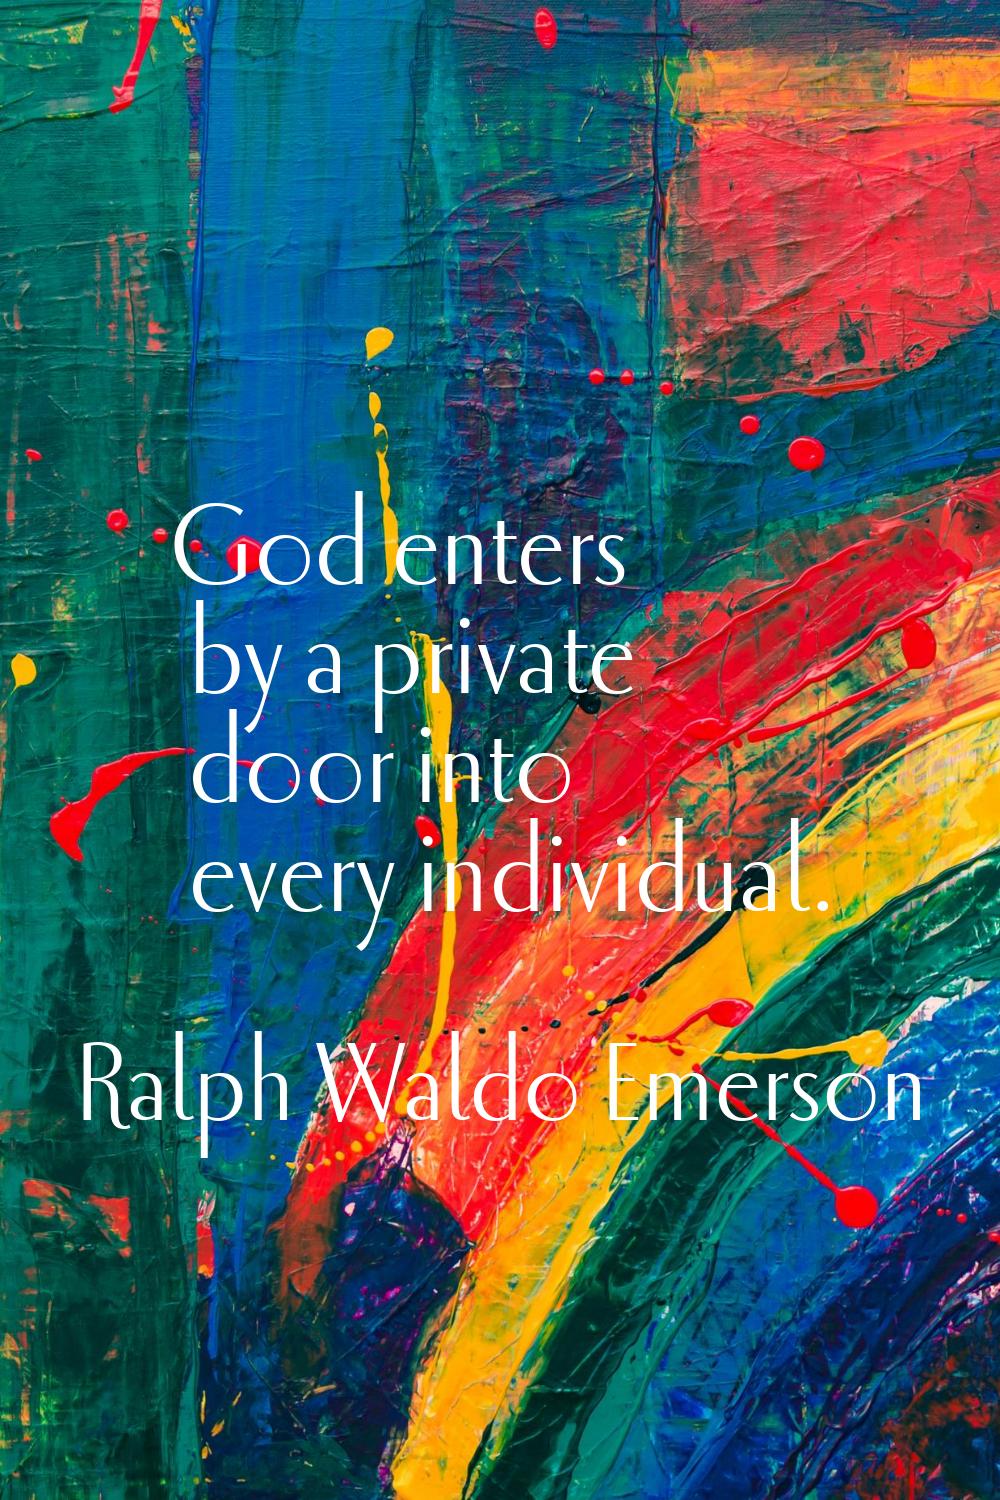 God enters by a private door into every individual.